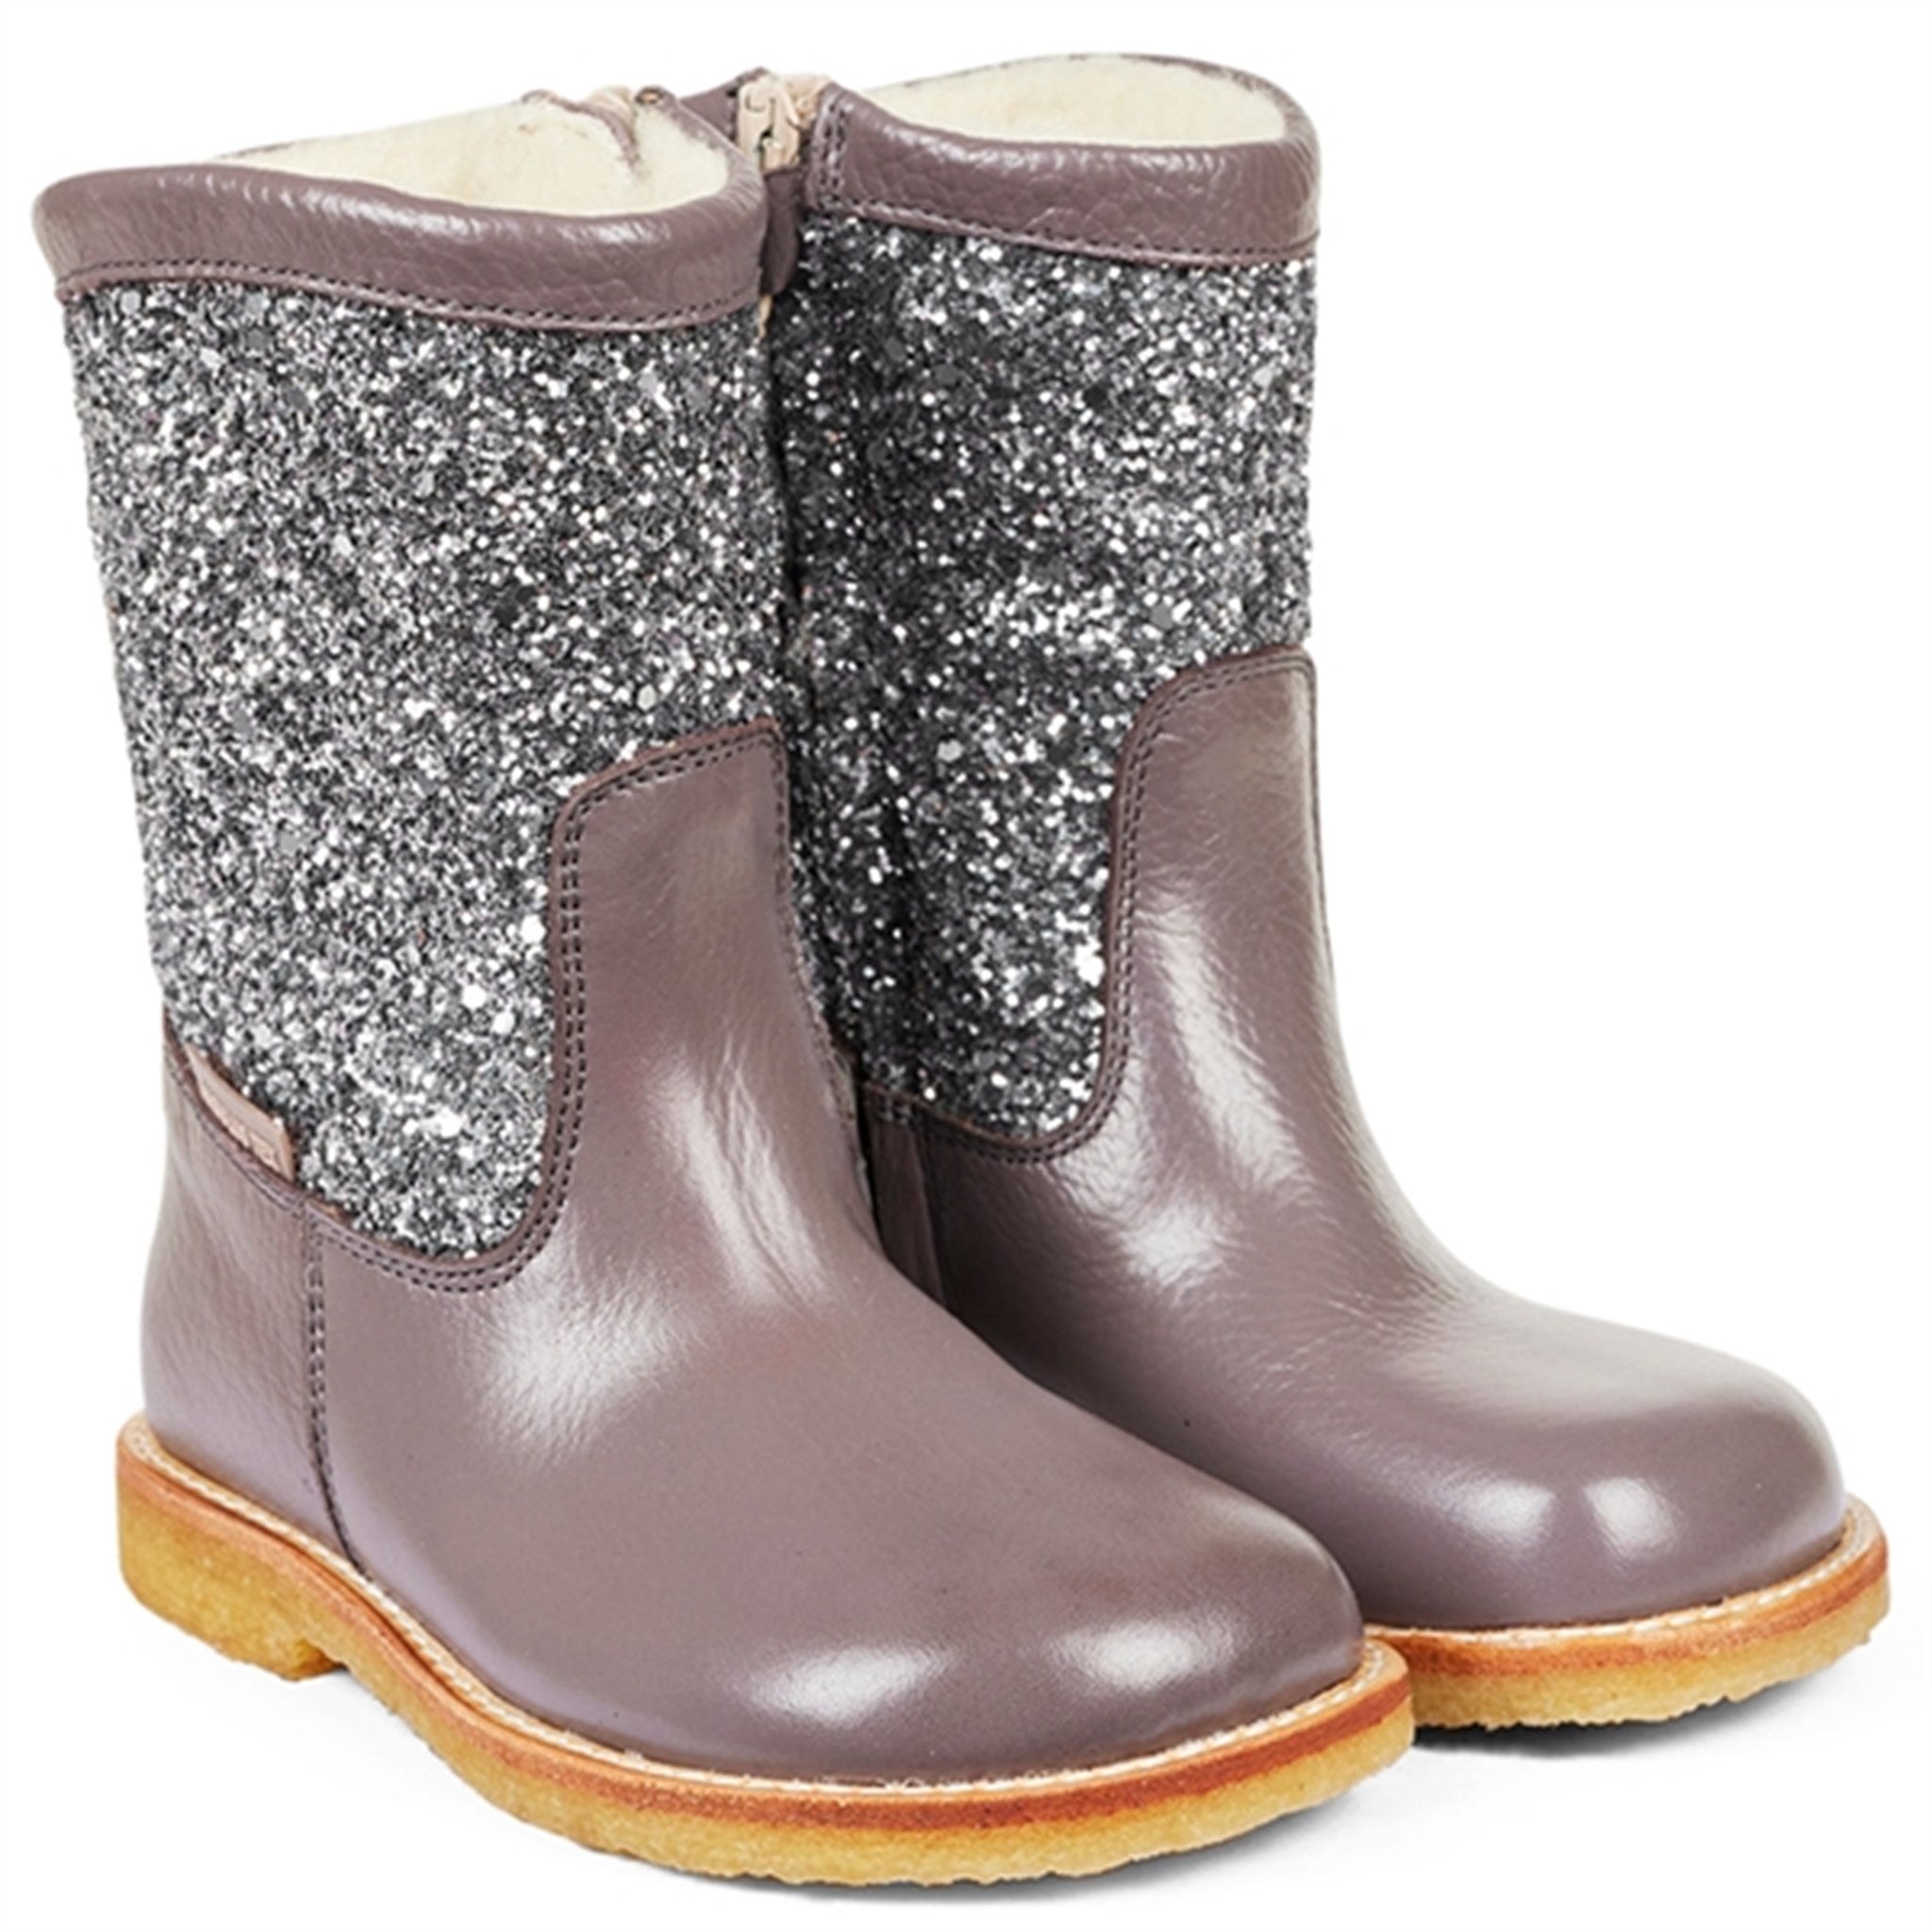 Angulus Tex Boots With Zipper Lavender/Dusty Lavender Glitter